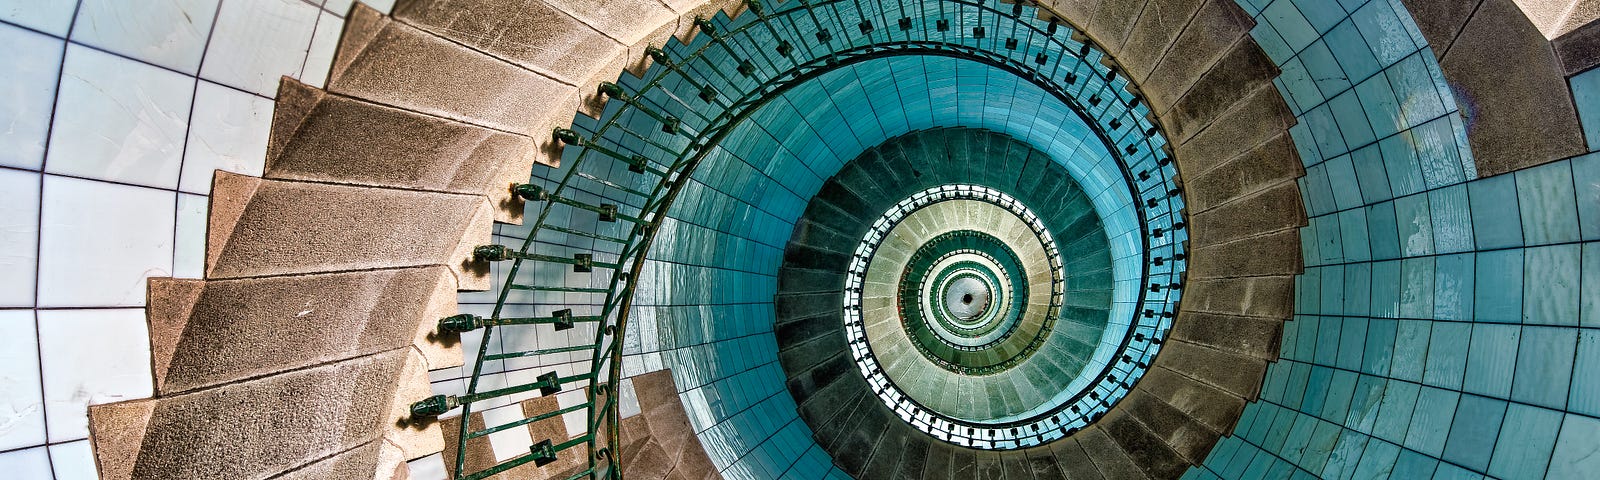 massive spiral staircase in beige and turquoise